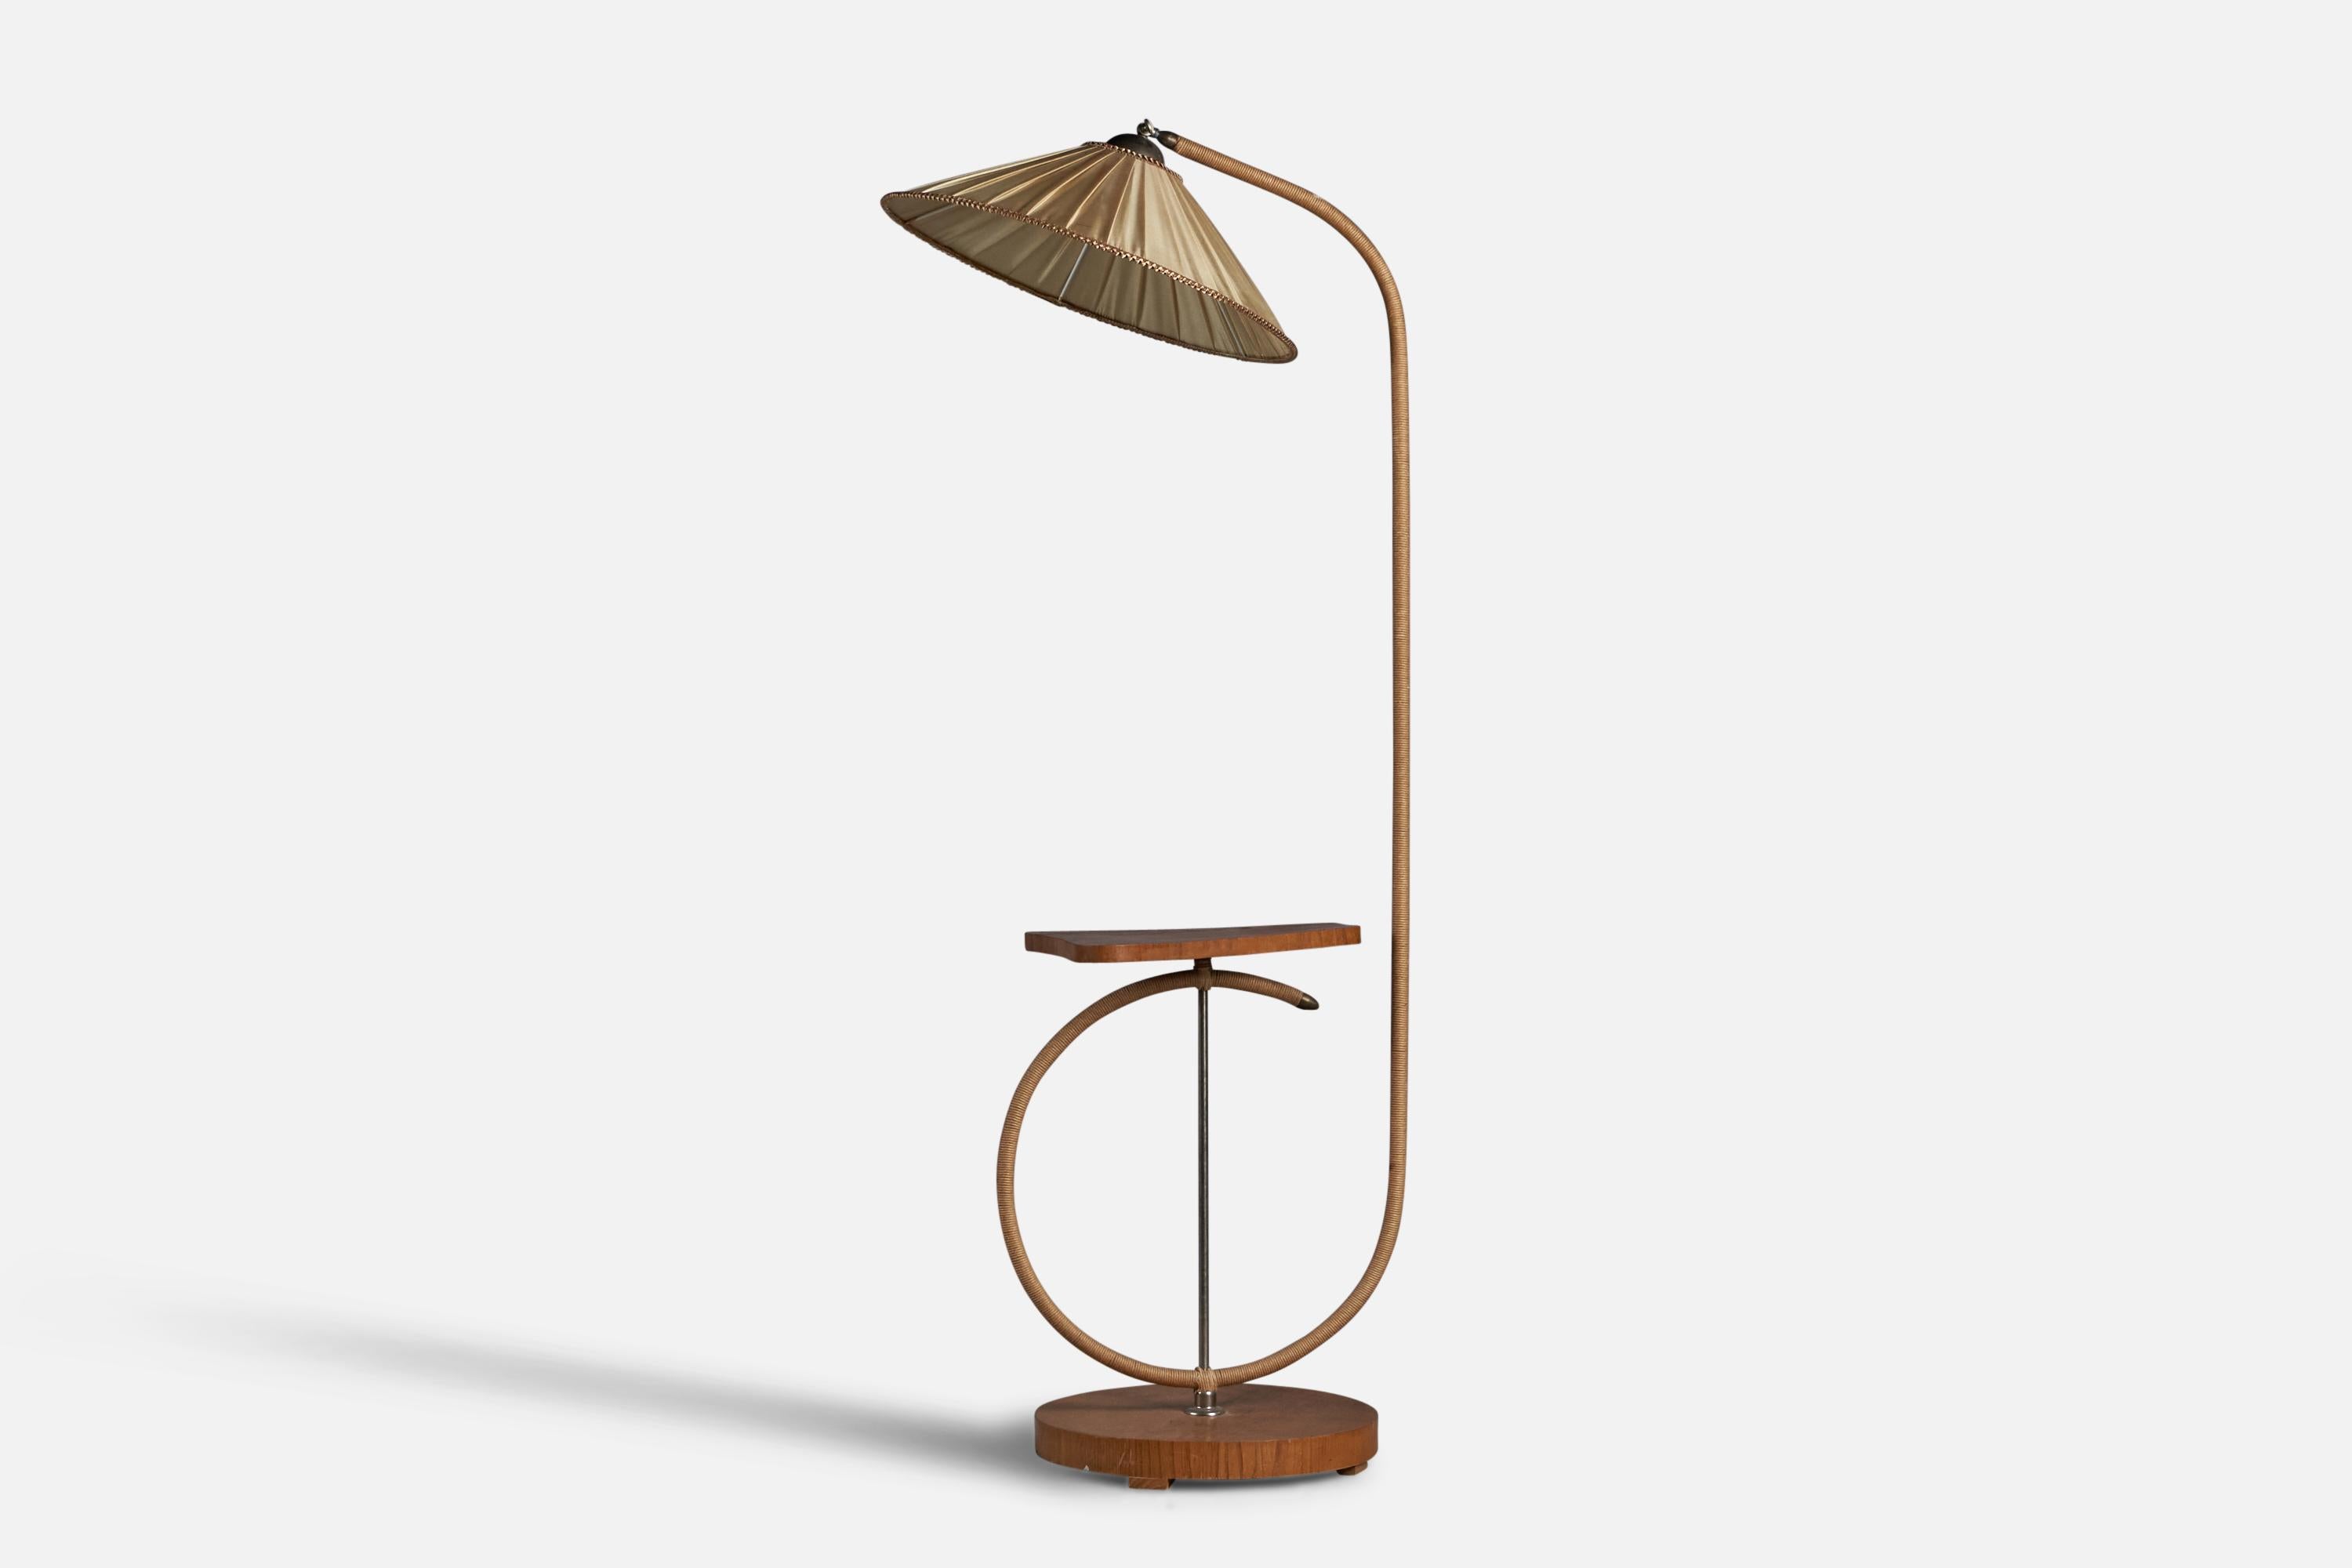 A cord, brass, elm and beige fabric floor lamp with side table designed and produced in Sweden, c. 1930s.

Overall Dimensions (inches): 65” H x 21.25” W x 25” D
Table Dimensions (inches): 25.25” H x 13.5” W x 15.25” D
Bulb Specifications: E-26